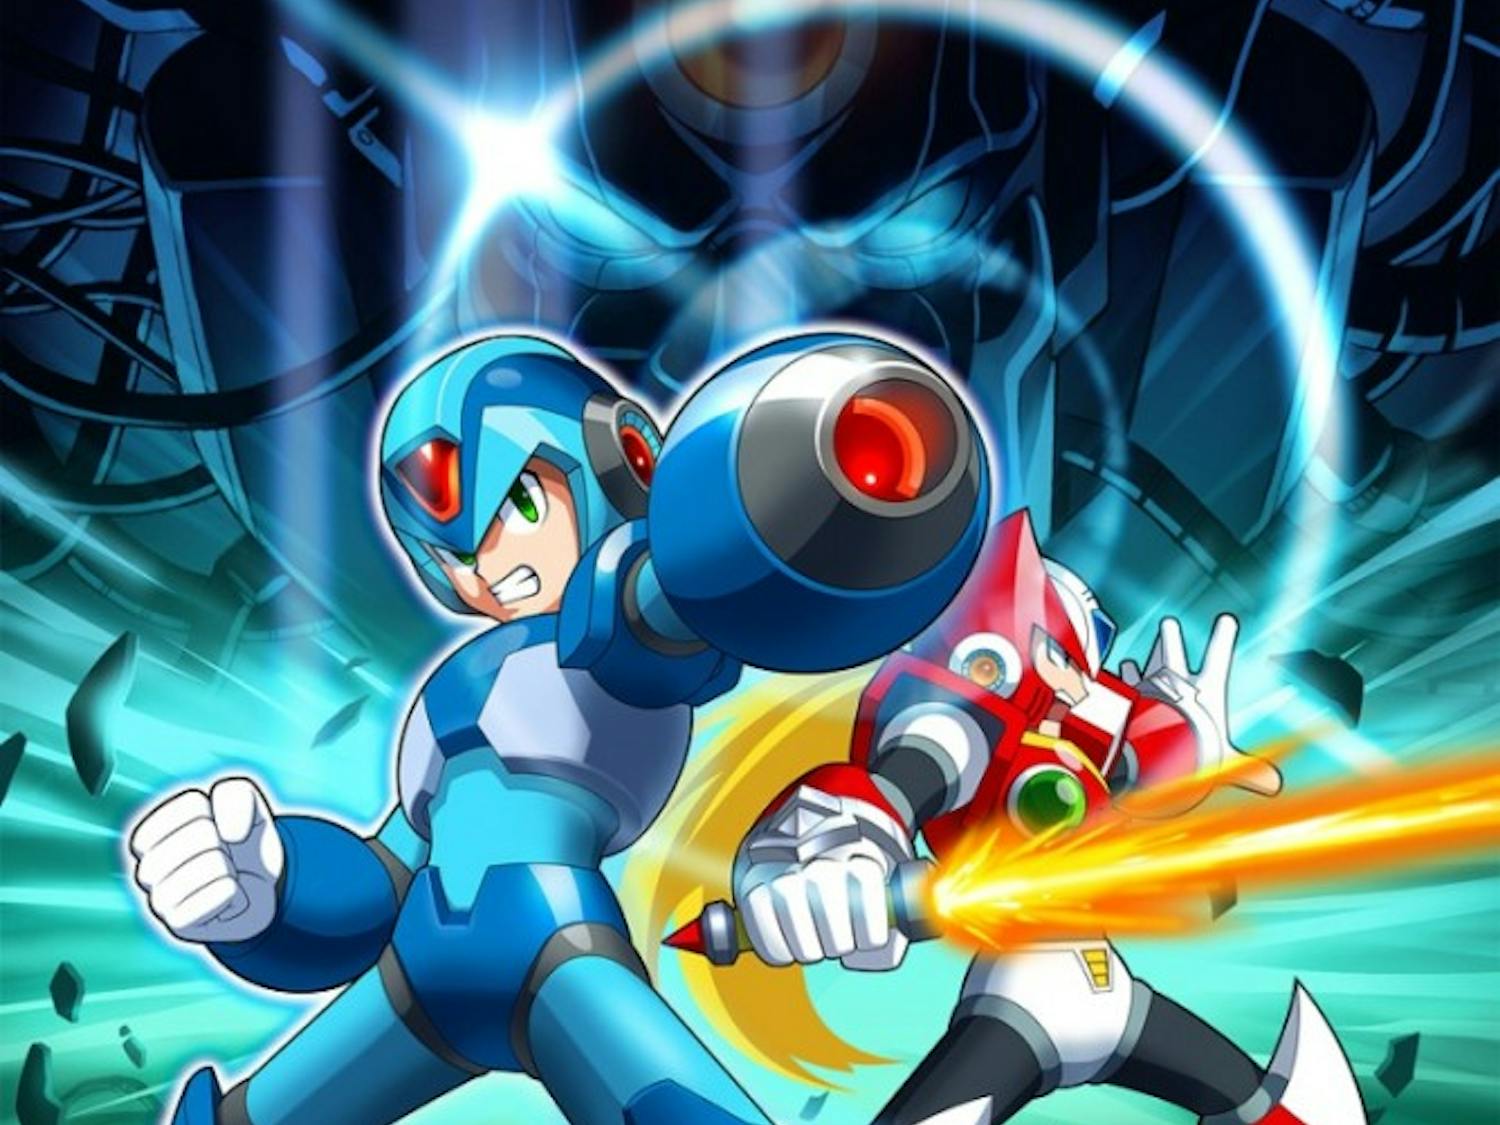 Another project that showed promise, Megaman Online was cancelled for reasons that have yet to have been fully explained. Photo courtesy vgboxart.com